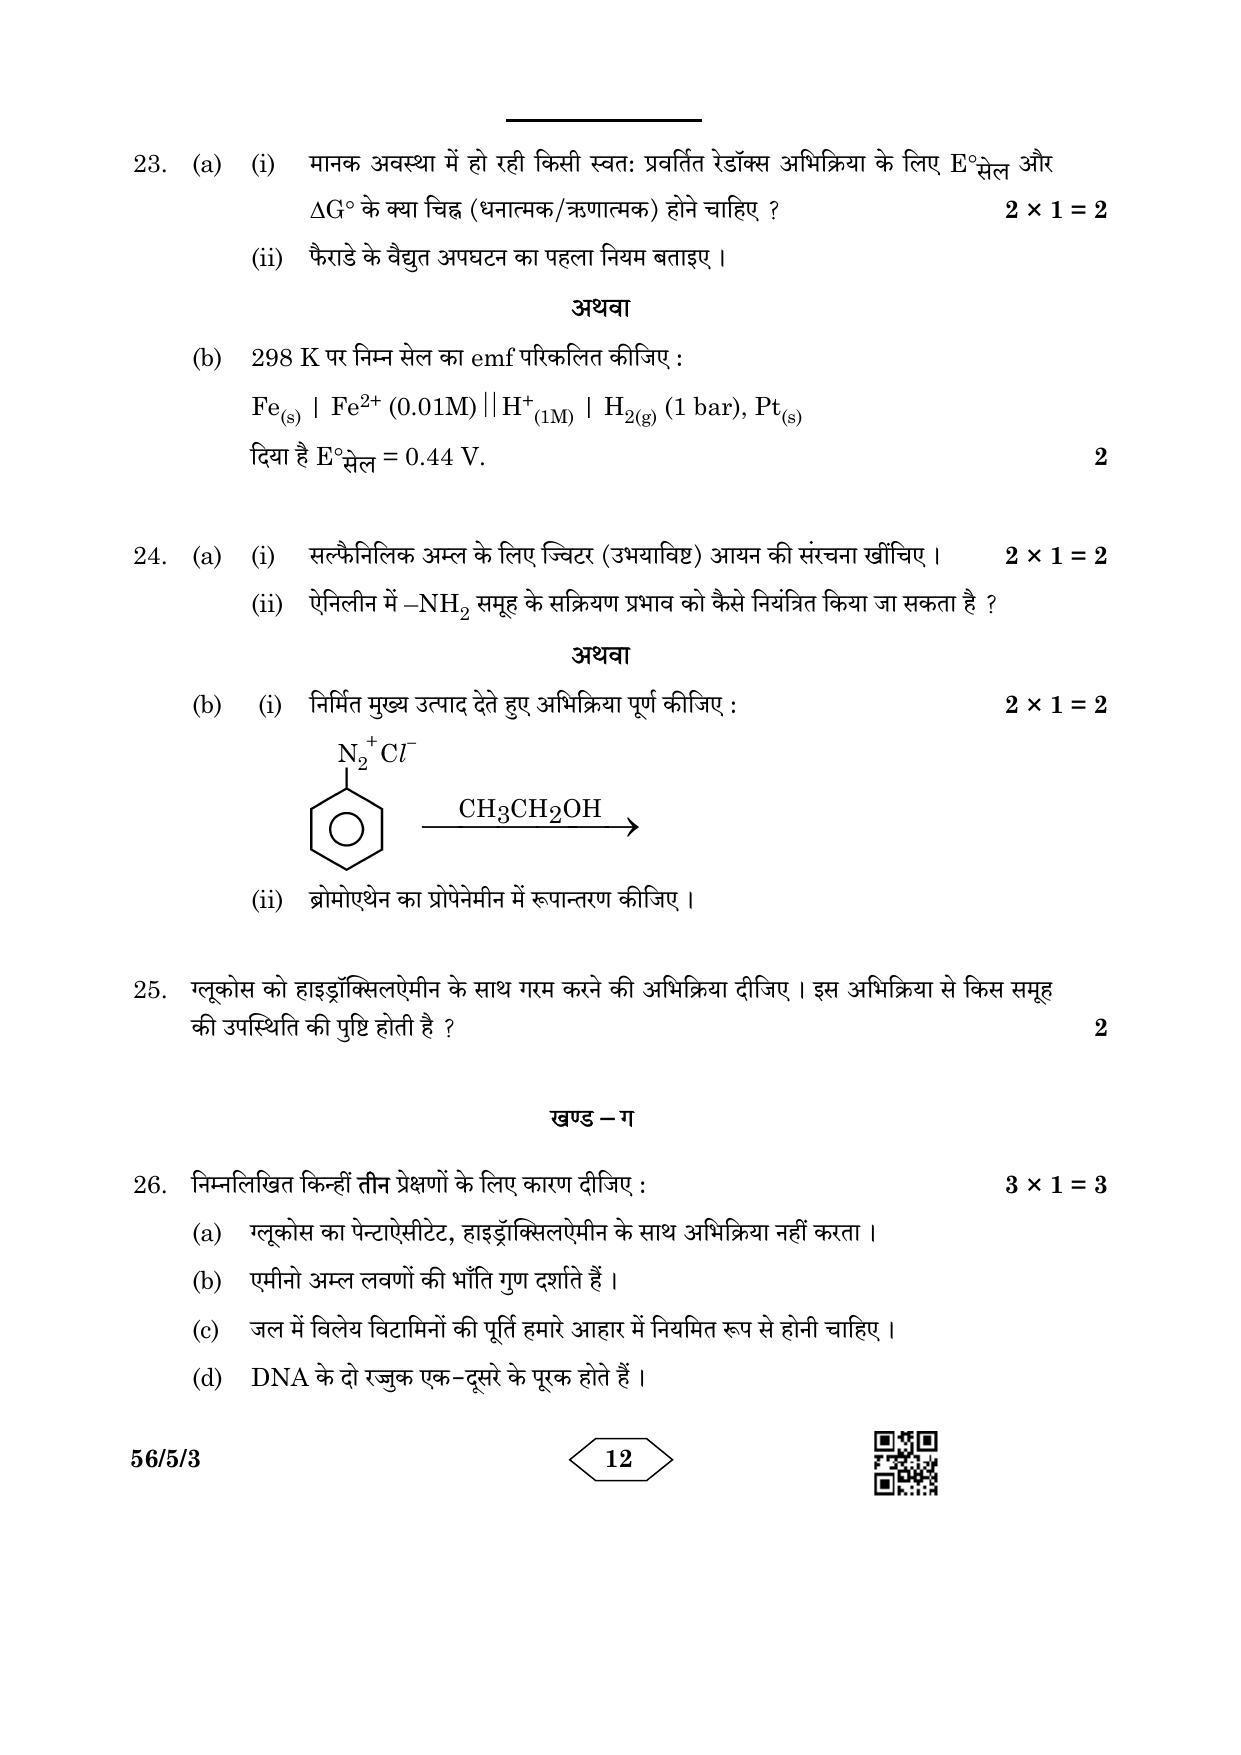 CBSE Class 12 56-5-3 Chemistry 2023 Question Paper - Page 12